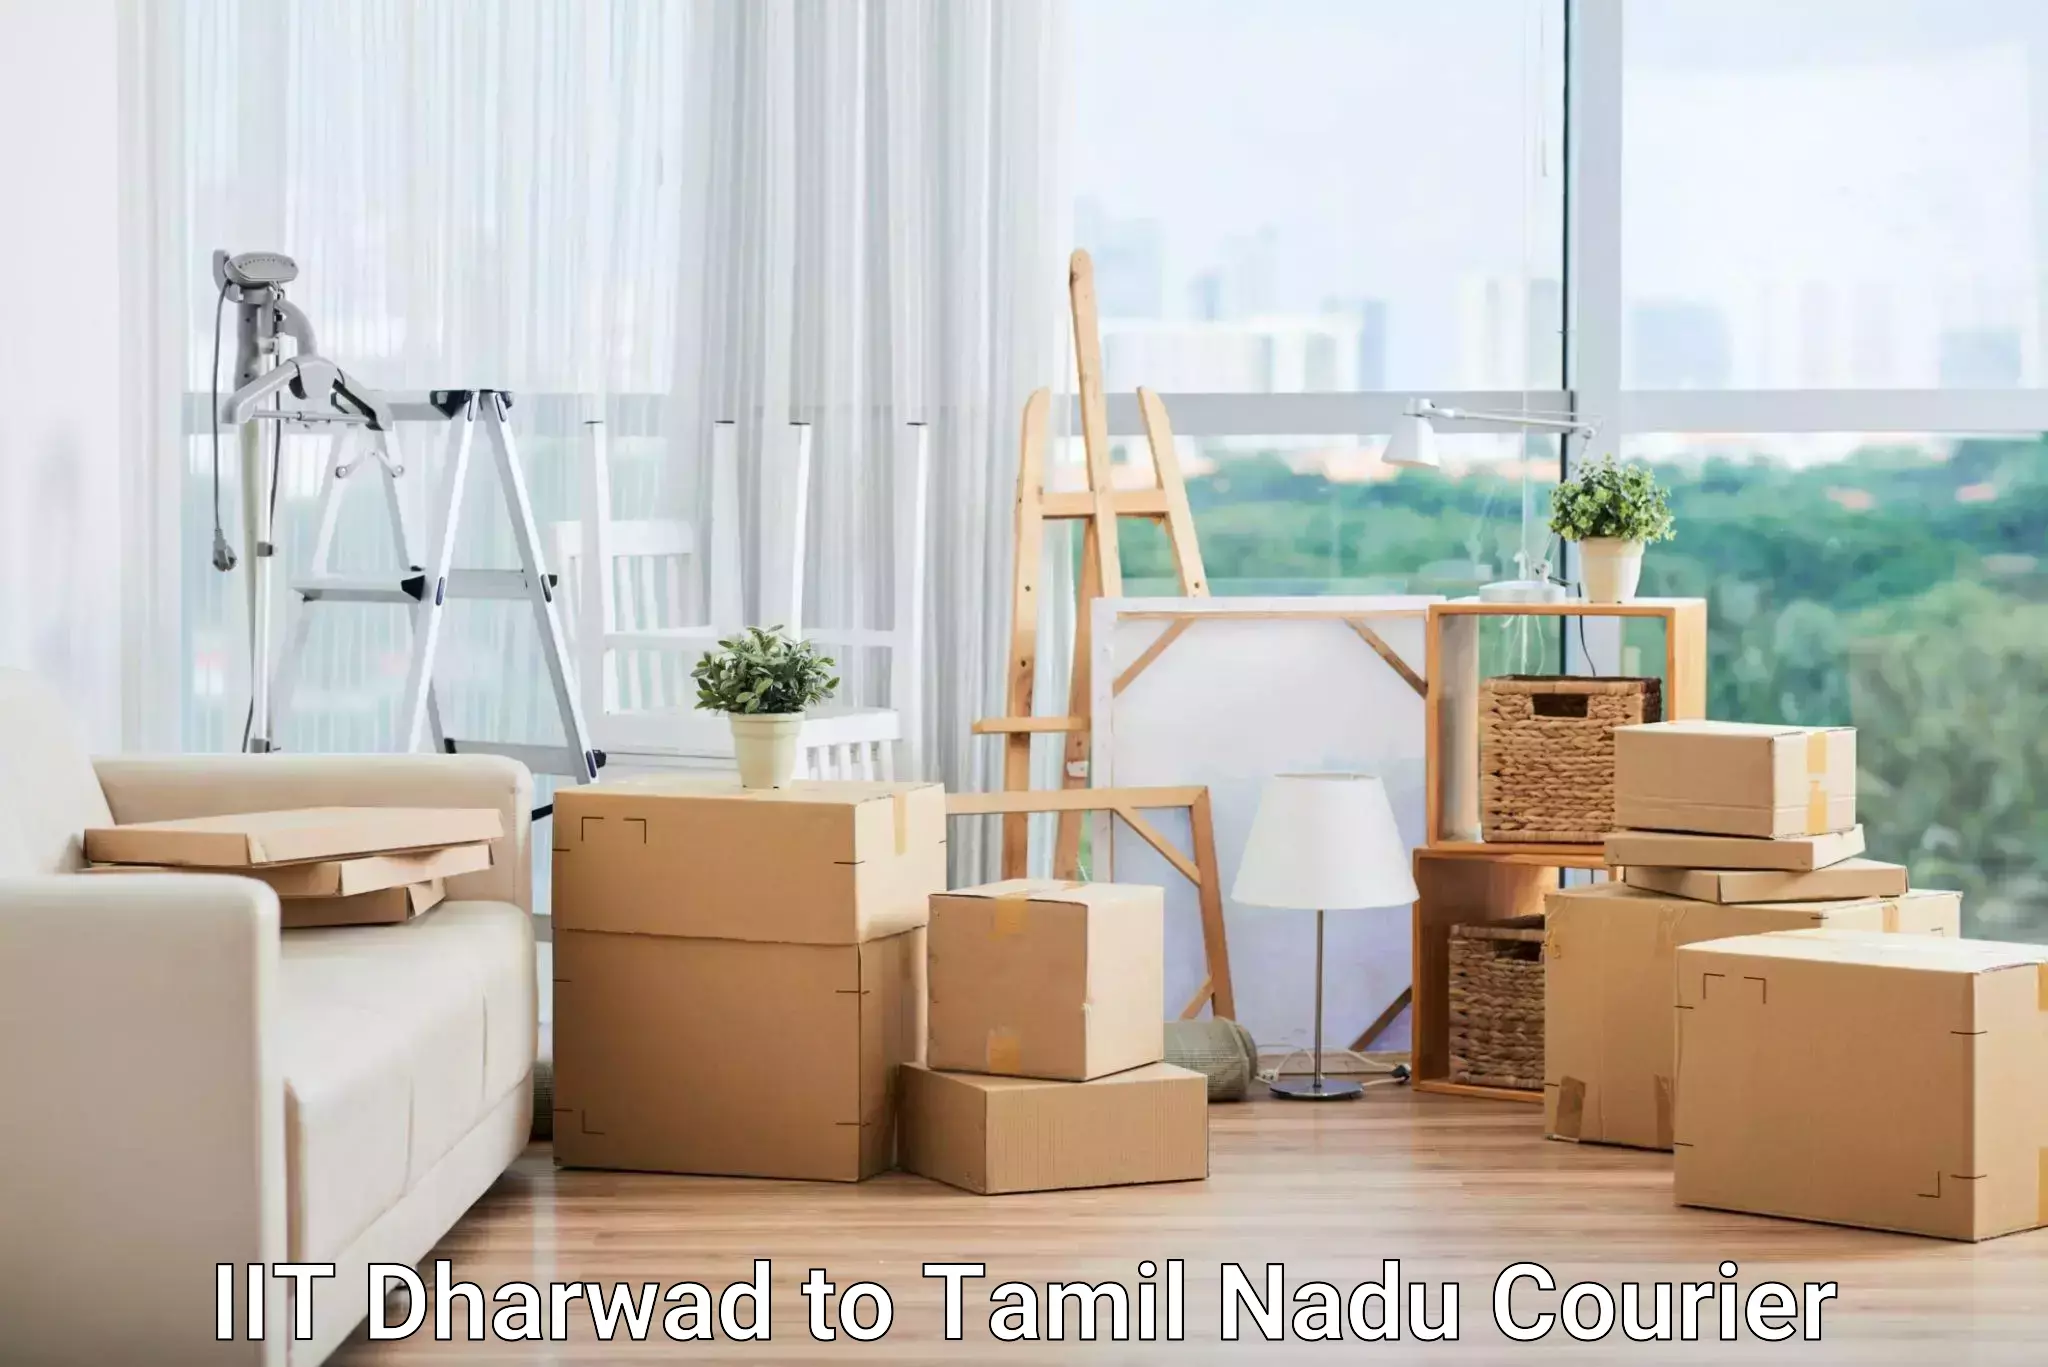 Express package services IIT Dharwad to Tamil Nadu